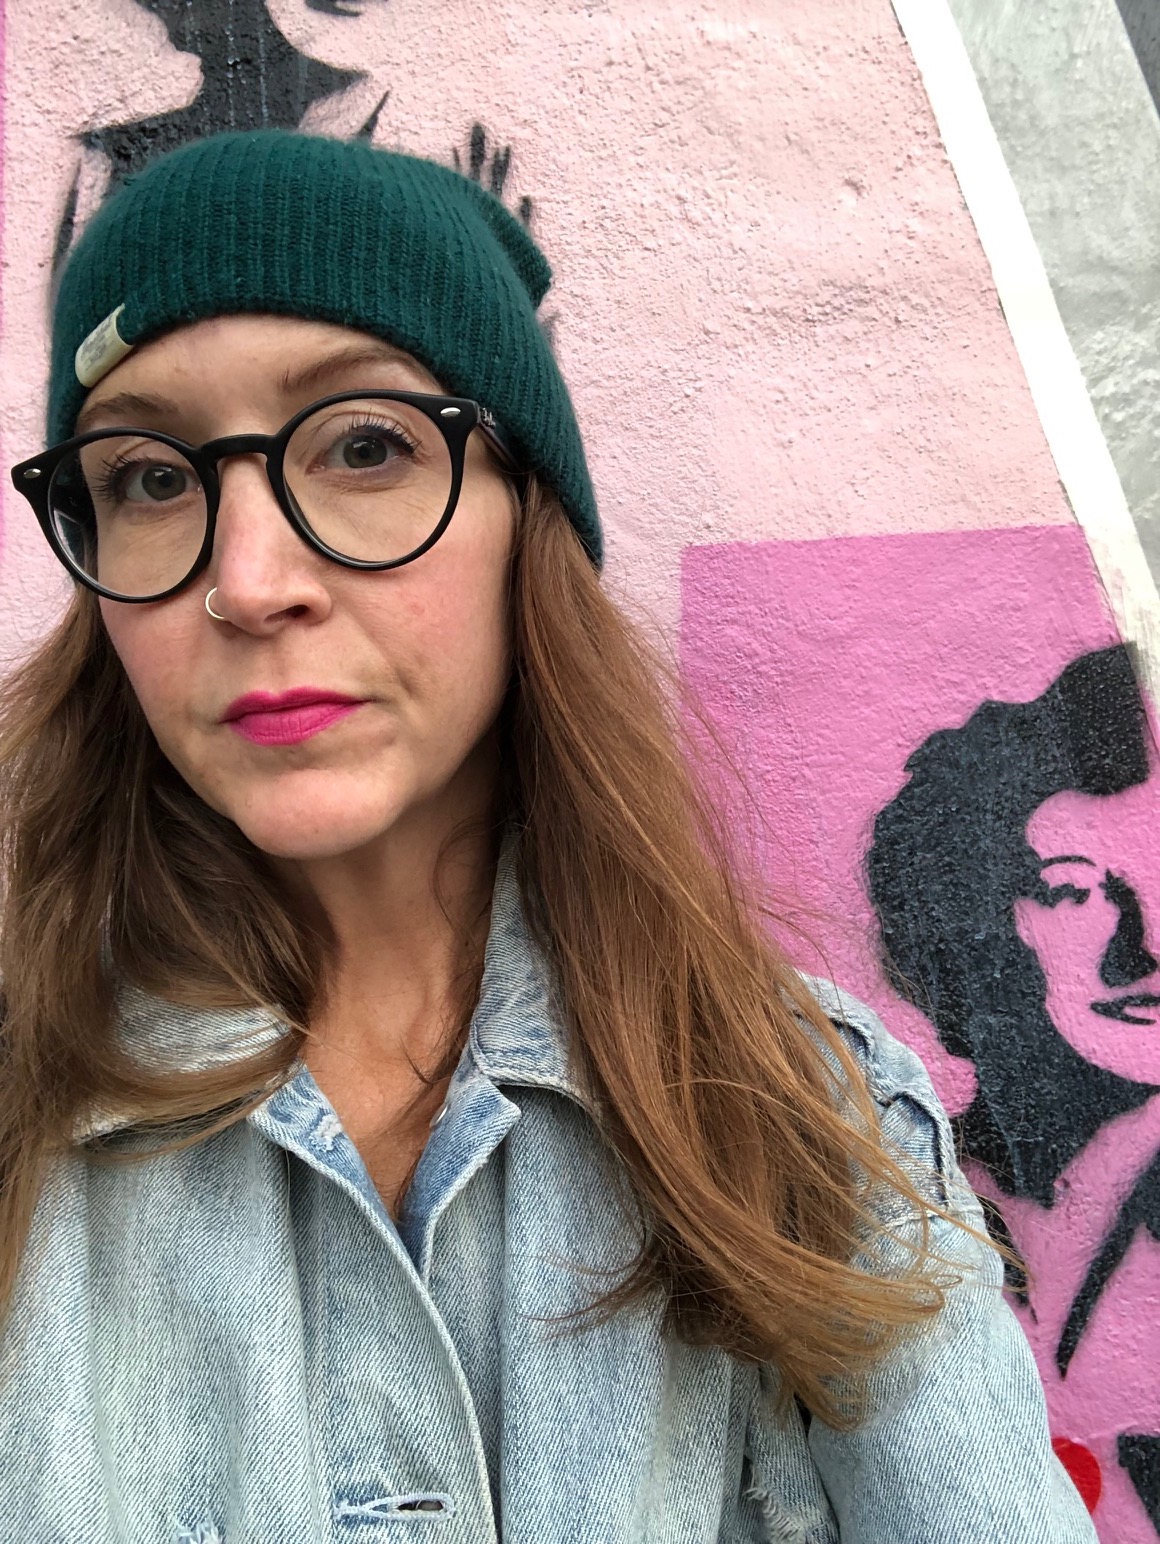 Jaymie Lathem wearing a black toque and glasses in front of a pink painted wall